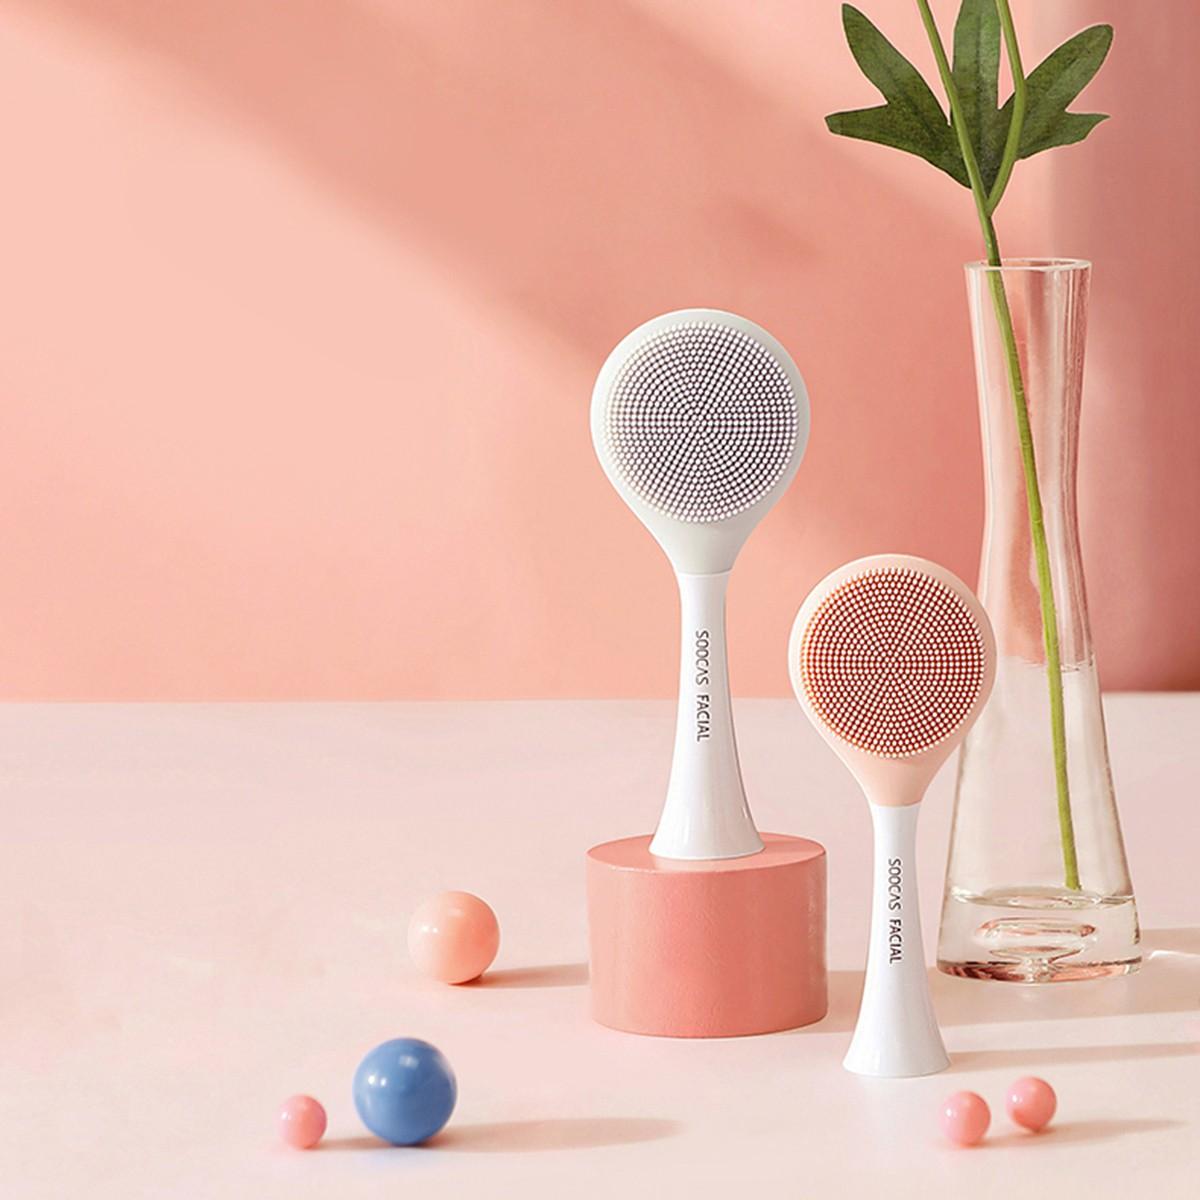 SOOCAS Gentle Facial Cleansing Brush Food Grade Silicone High-density Soft Fine Bristles Fit with X1/X3/X5 Electric Toot